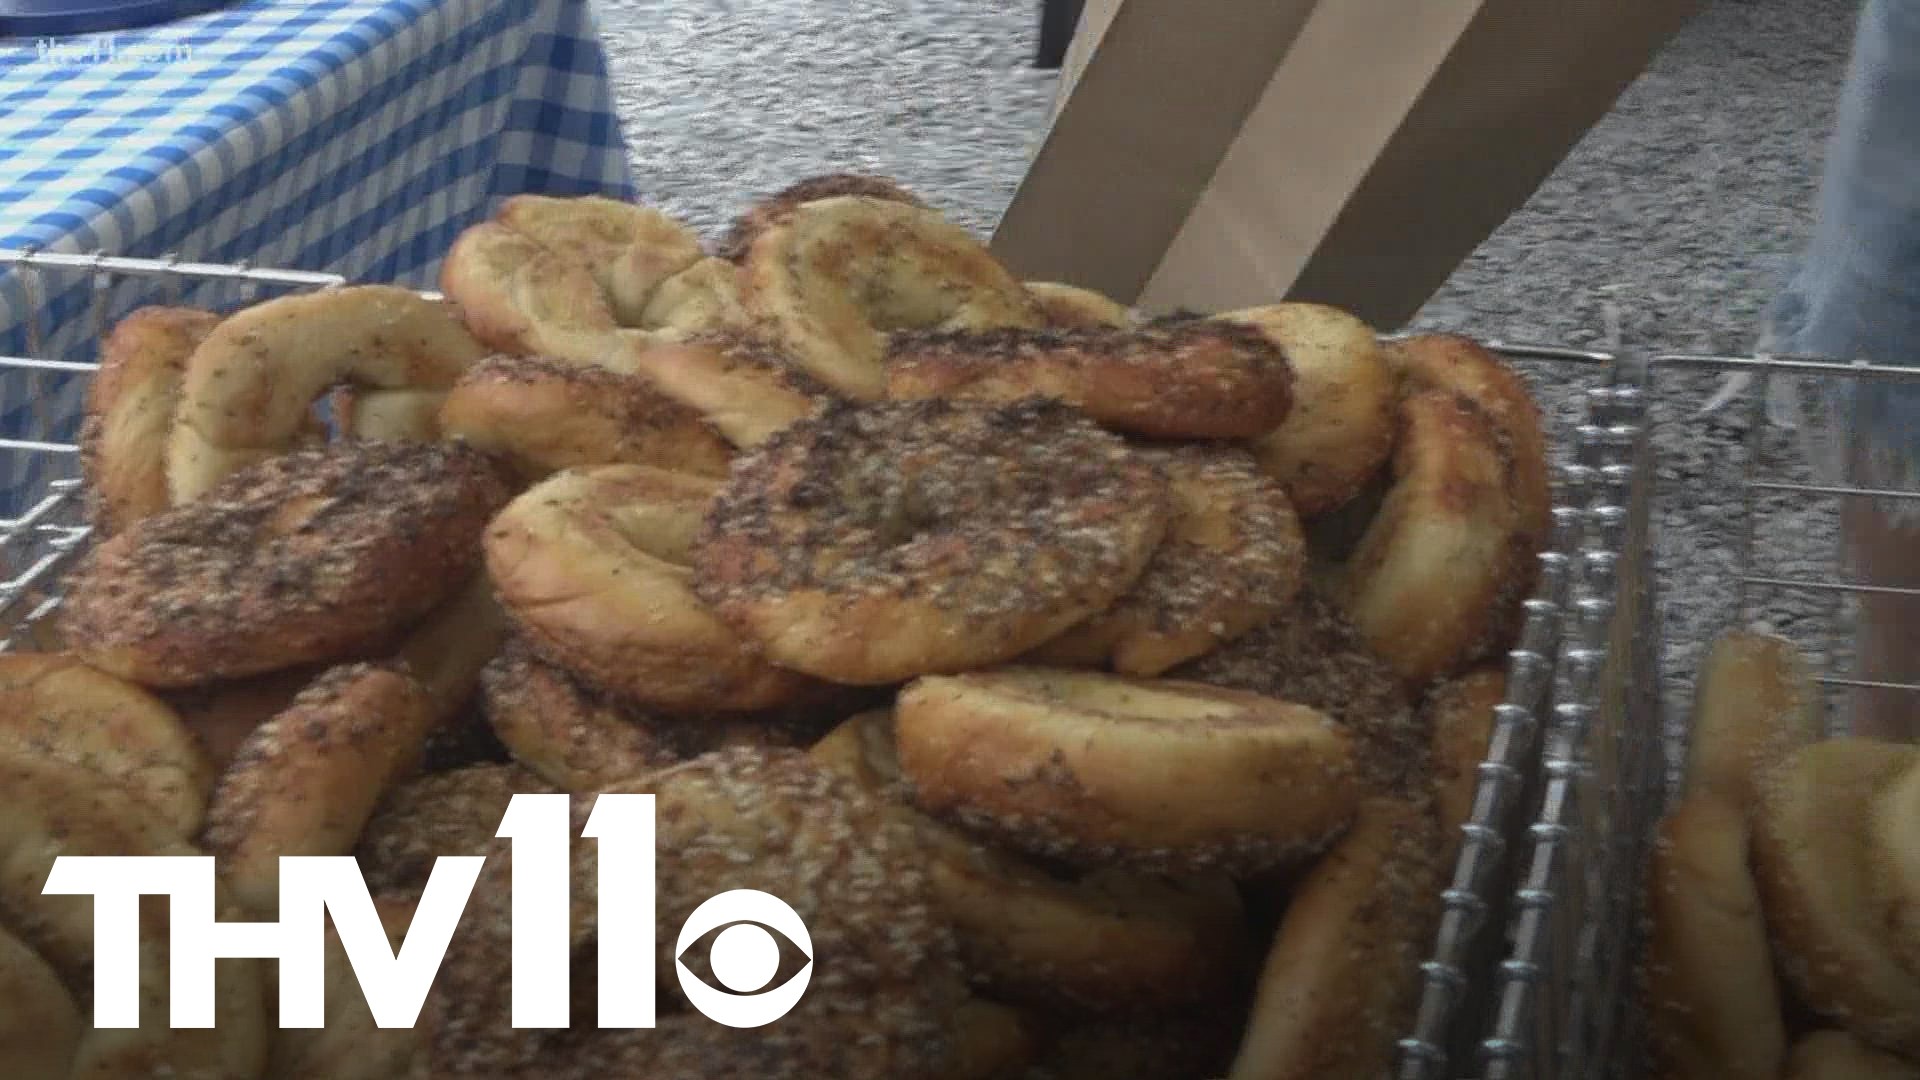 There's a new bagel pop-up shop in town and it's a hit with the community and on social media! it has everyone eager and excited to stand in line and order.